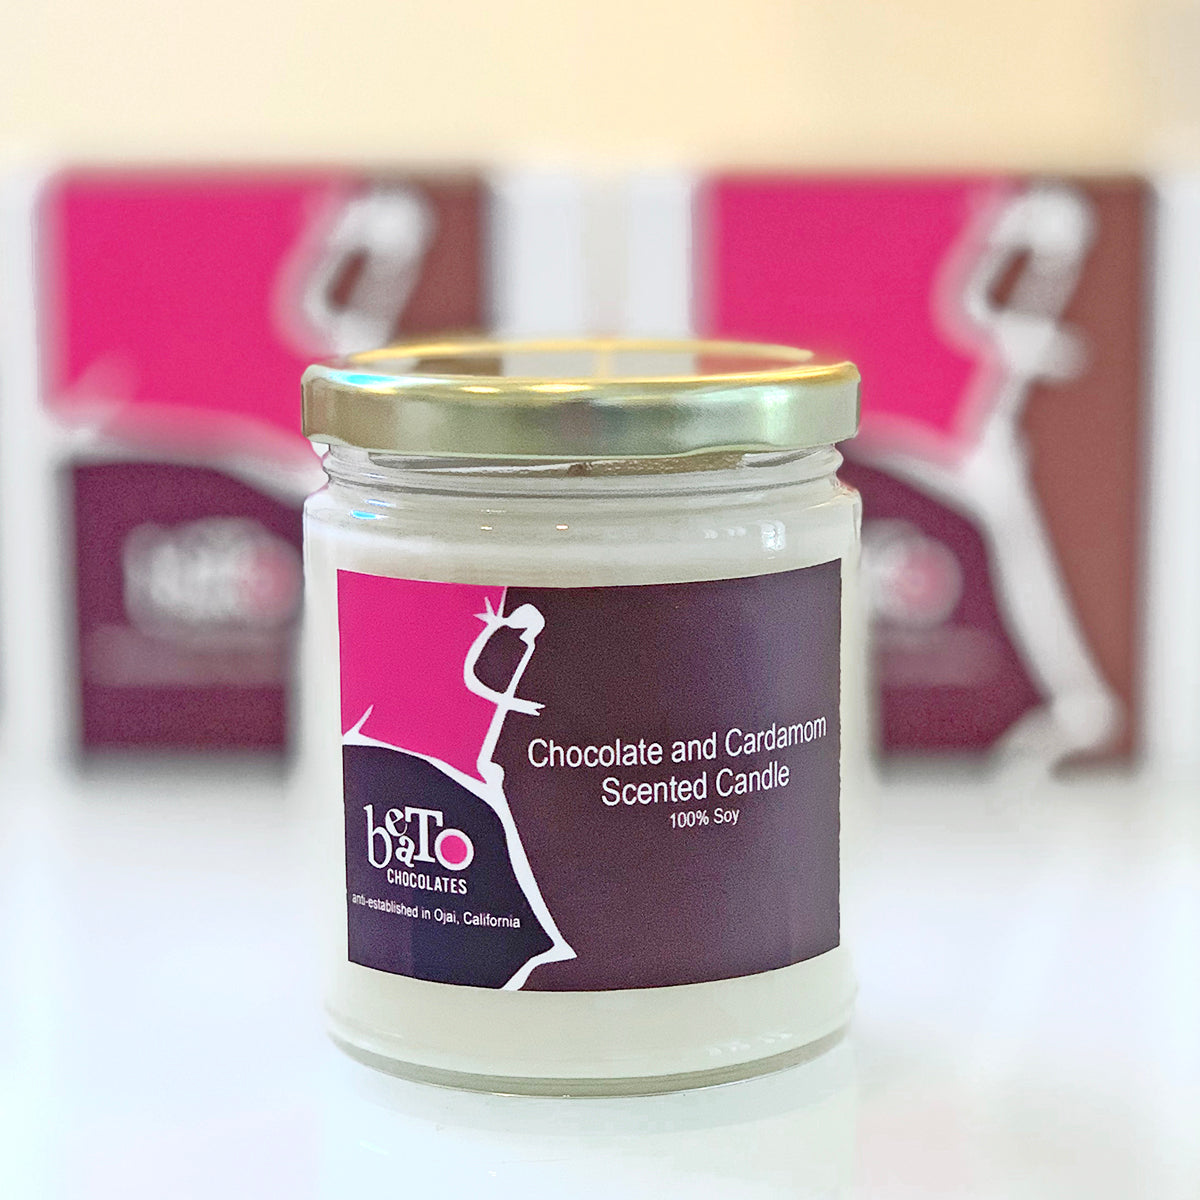 Chocolate and Cardamom Scented Candle